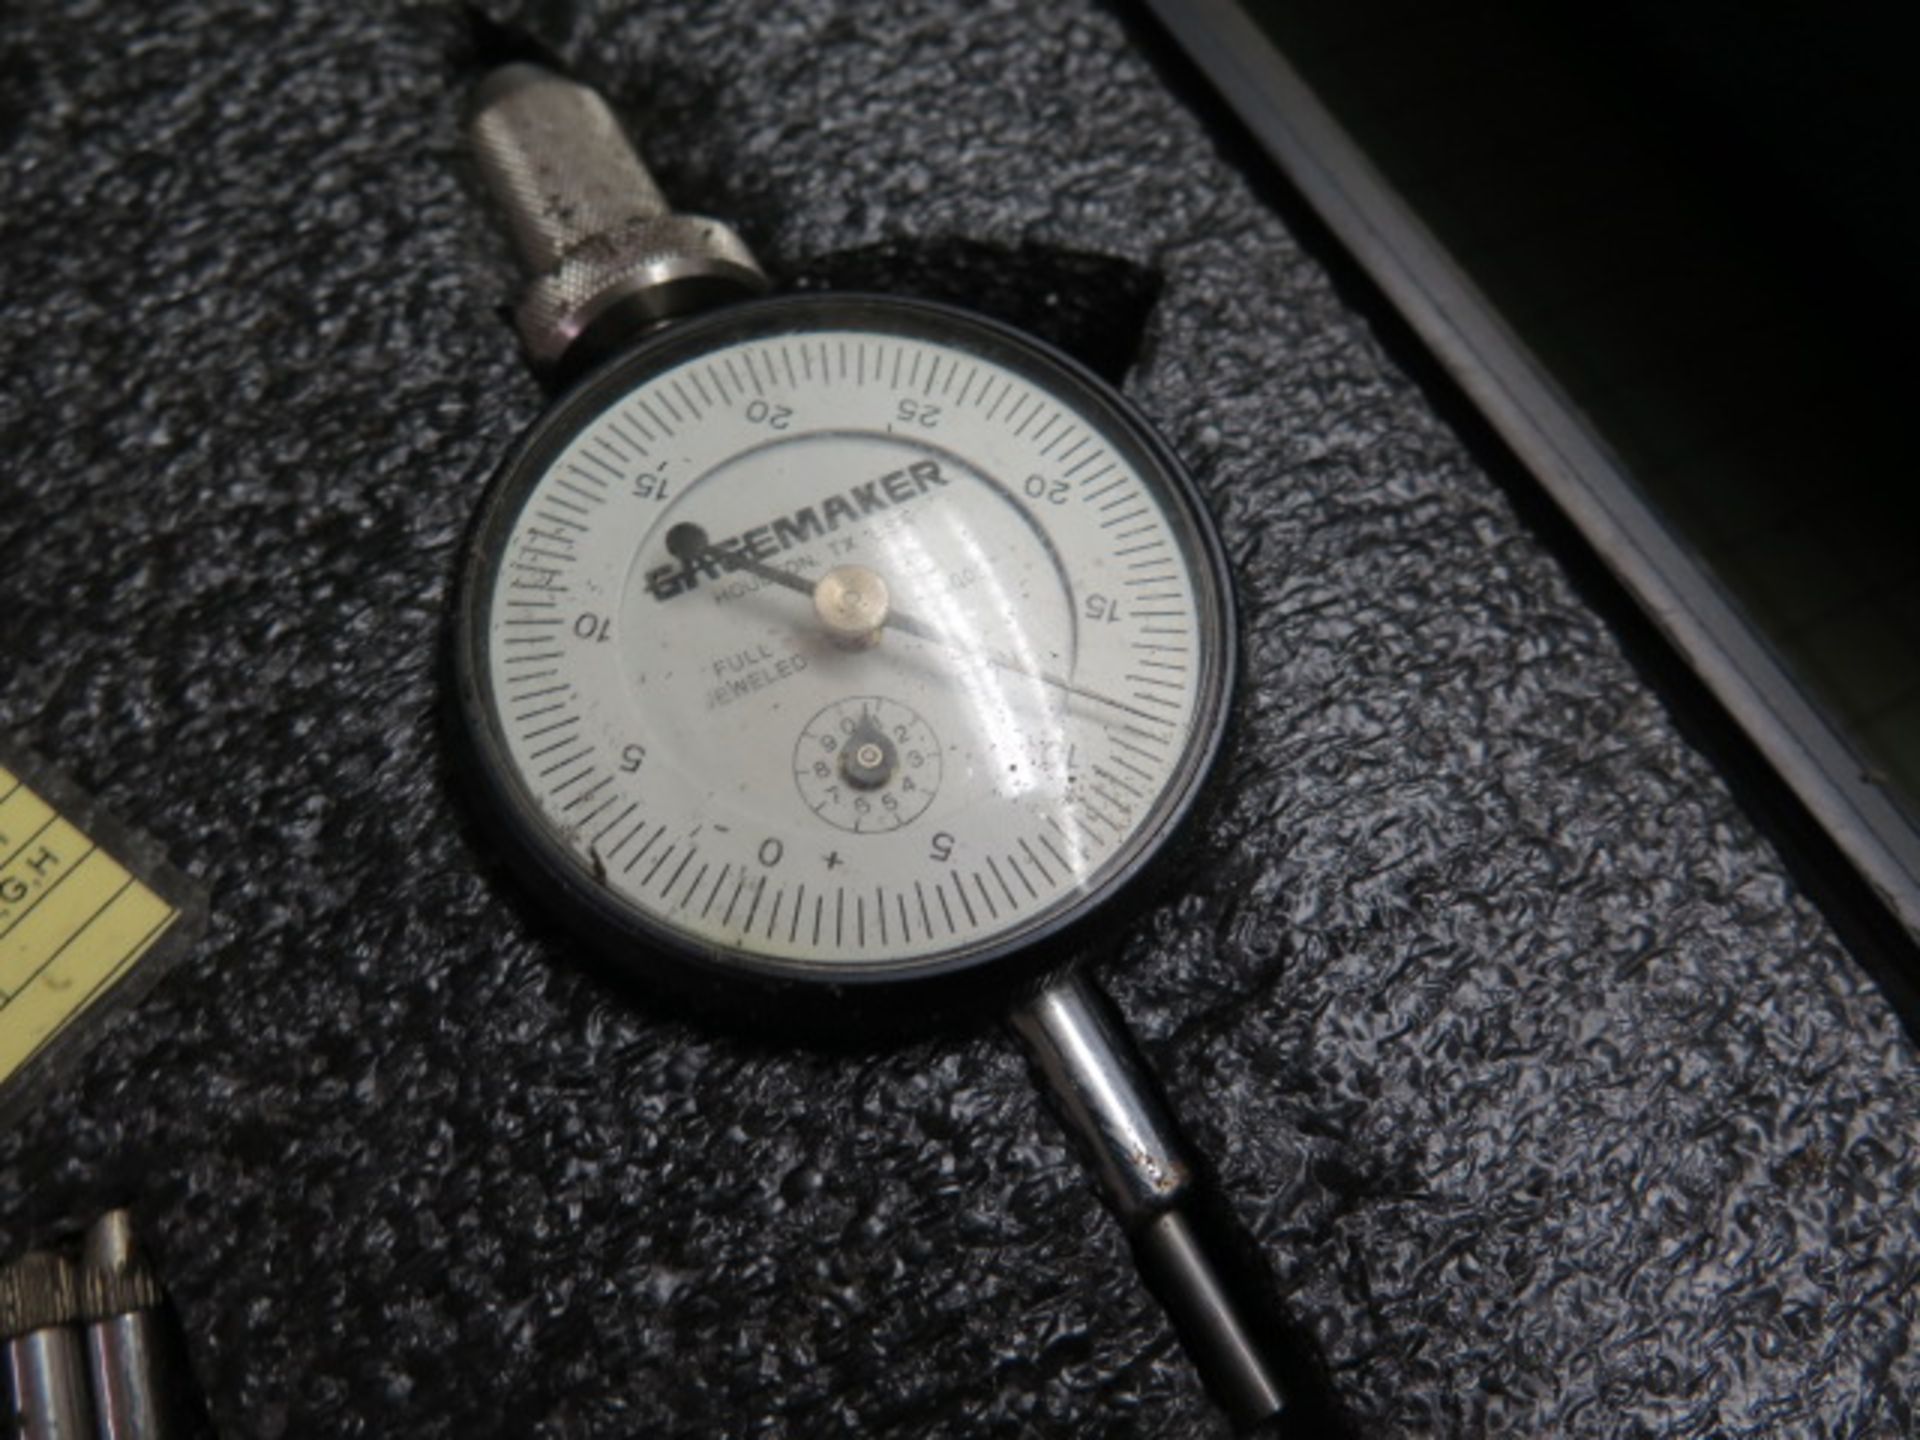 Gagemaker PD-6001 Dial Extension Rod Gage (SOLD AS-IS - NO WARRANTY) - Image 3 of 4